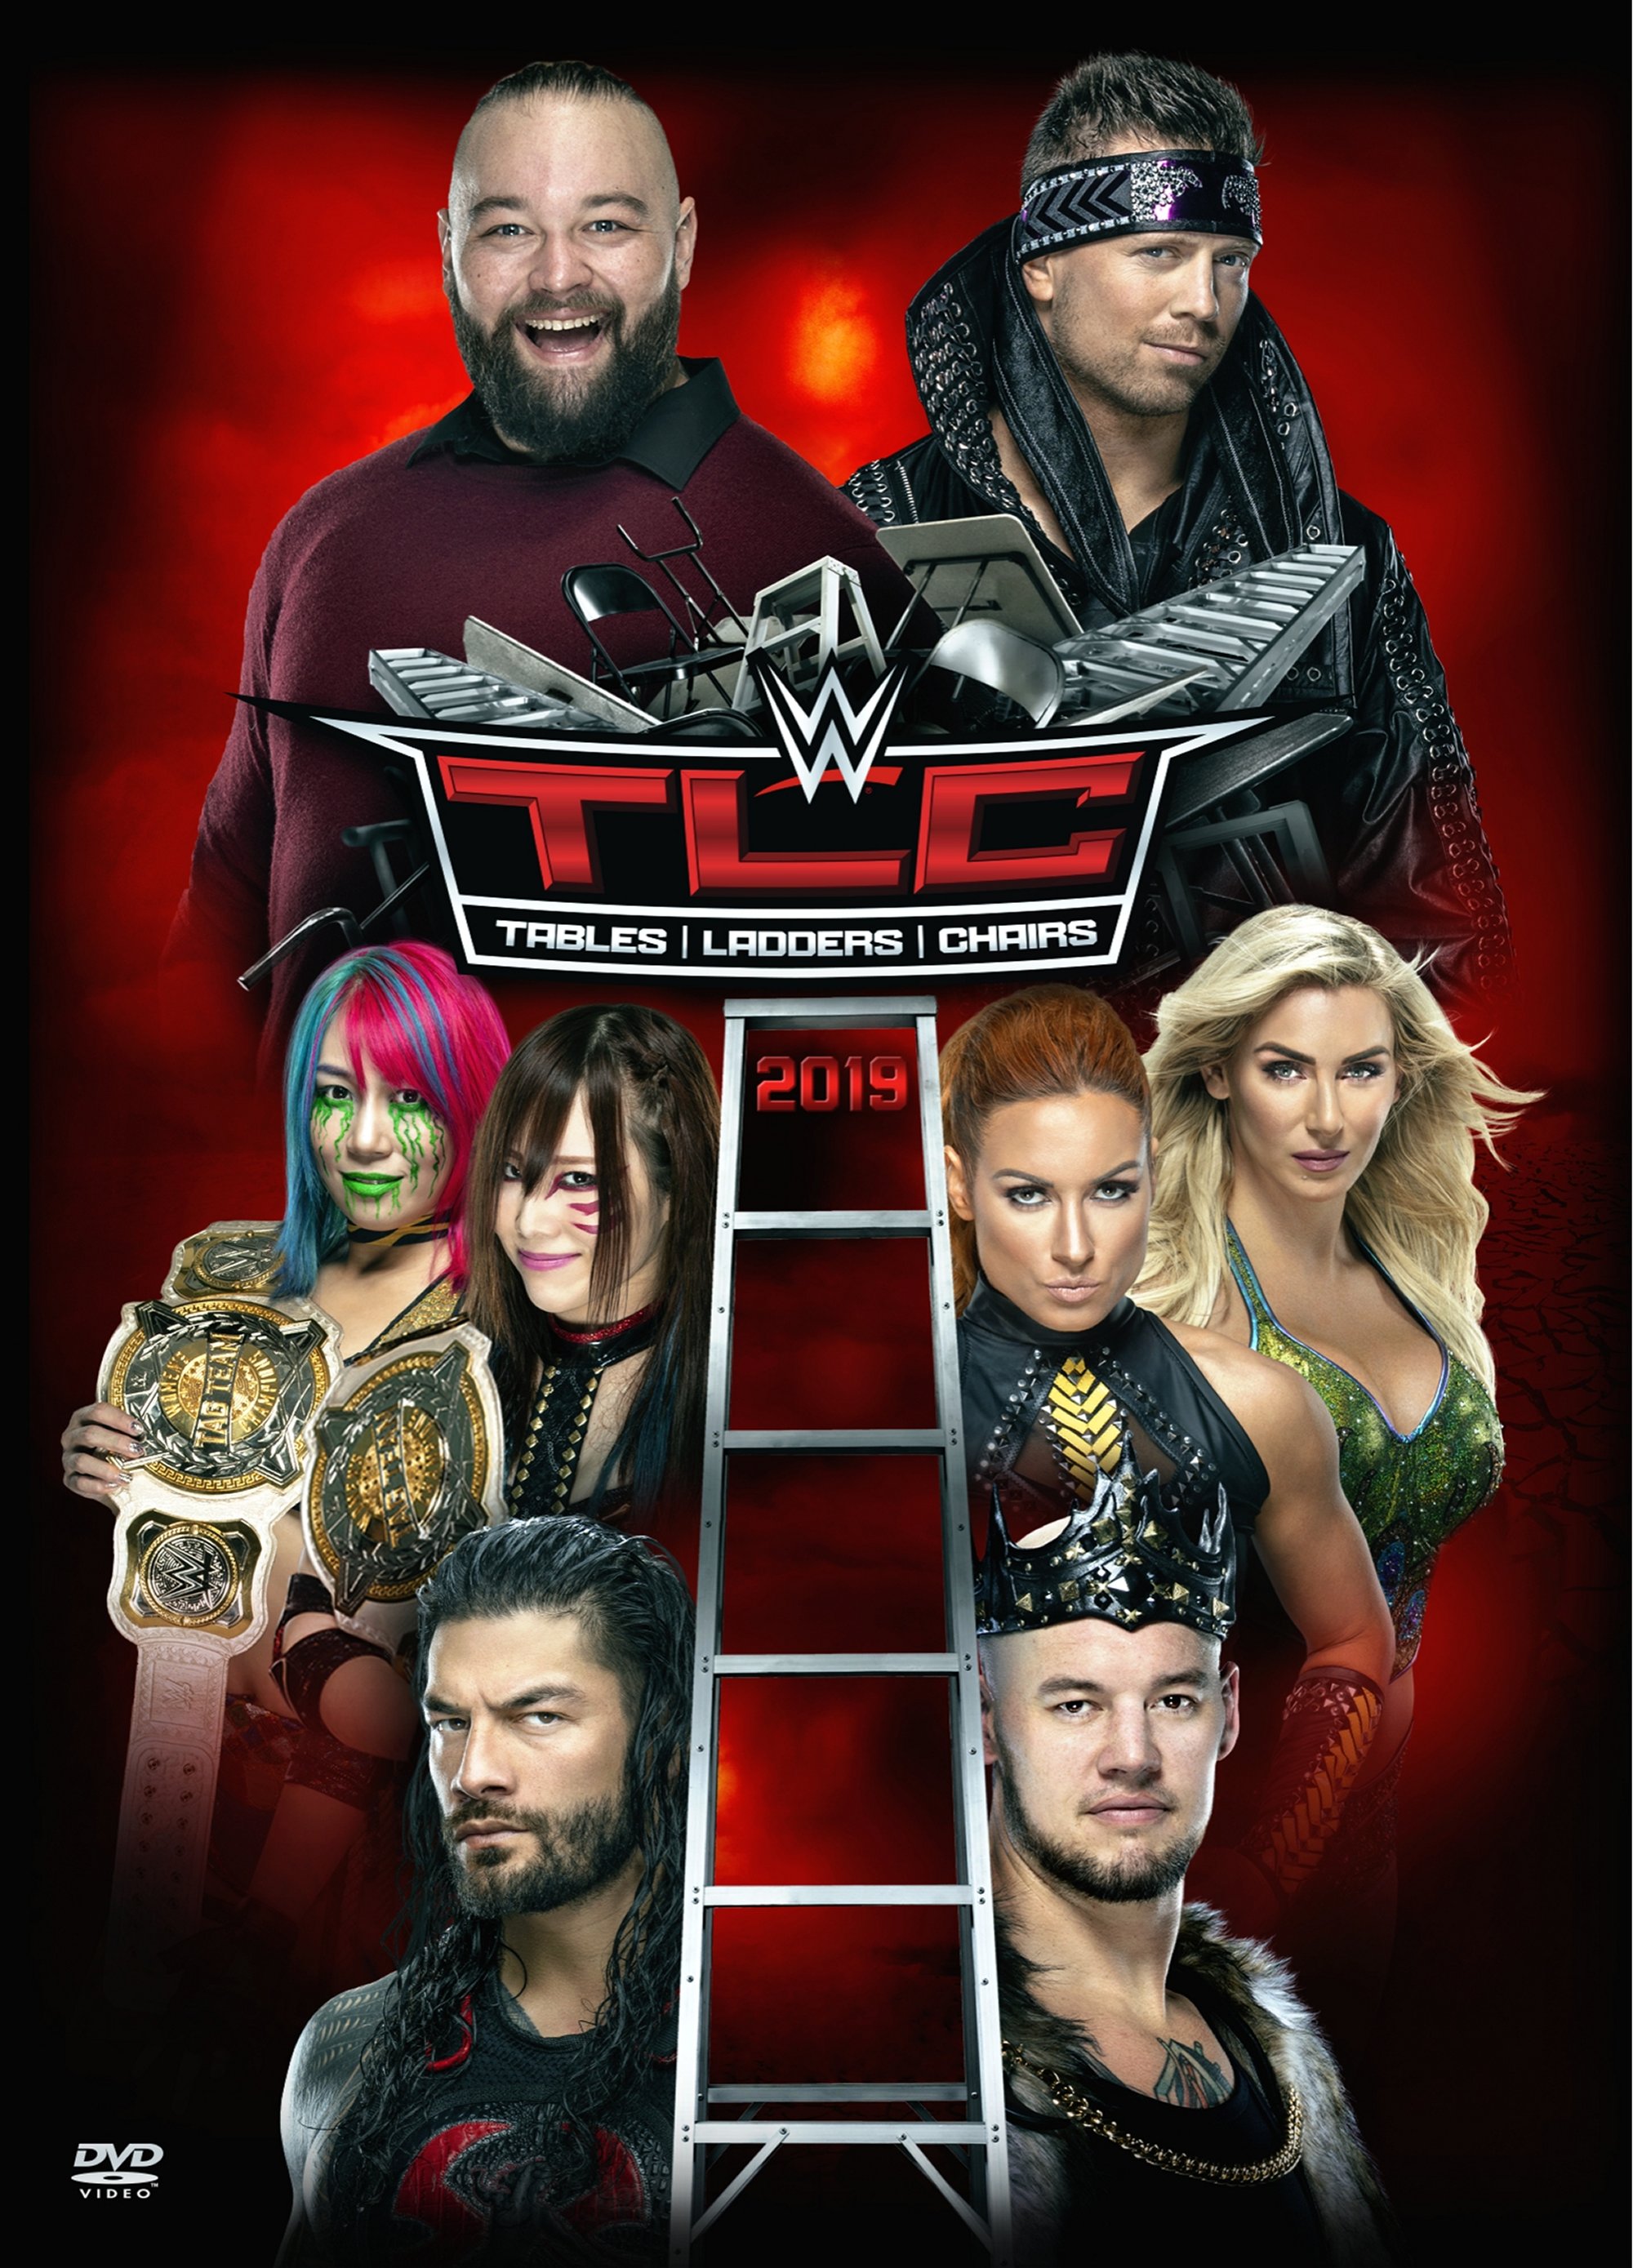 Wwe Tlc Tables Ladders And Chairs 2019 Dvd 2019 Best Buy